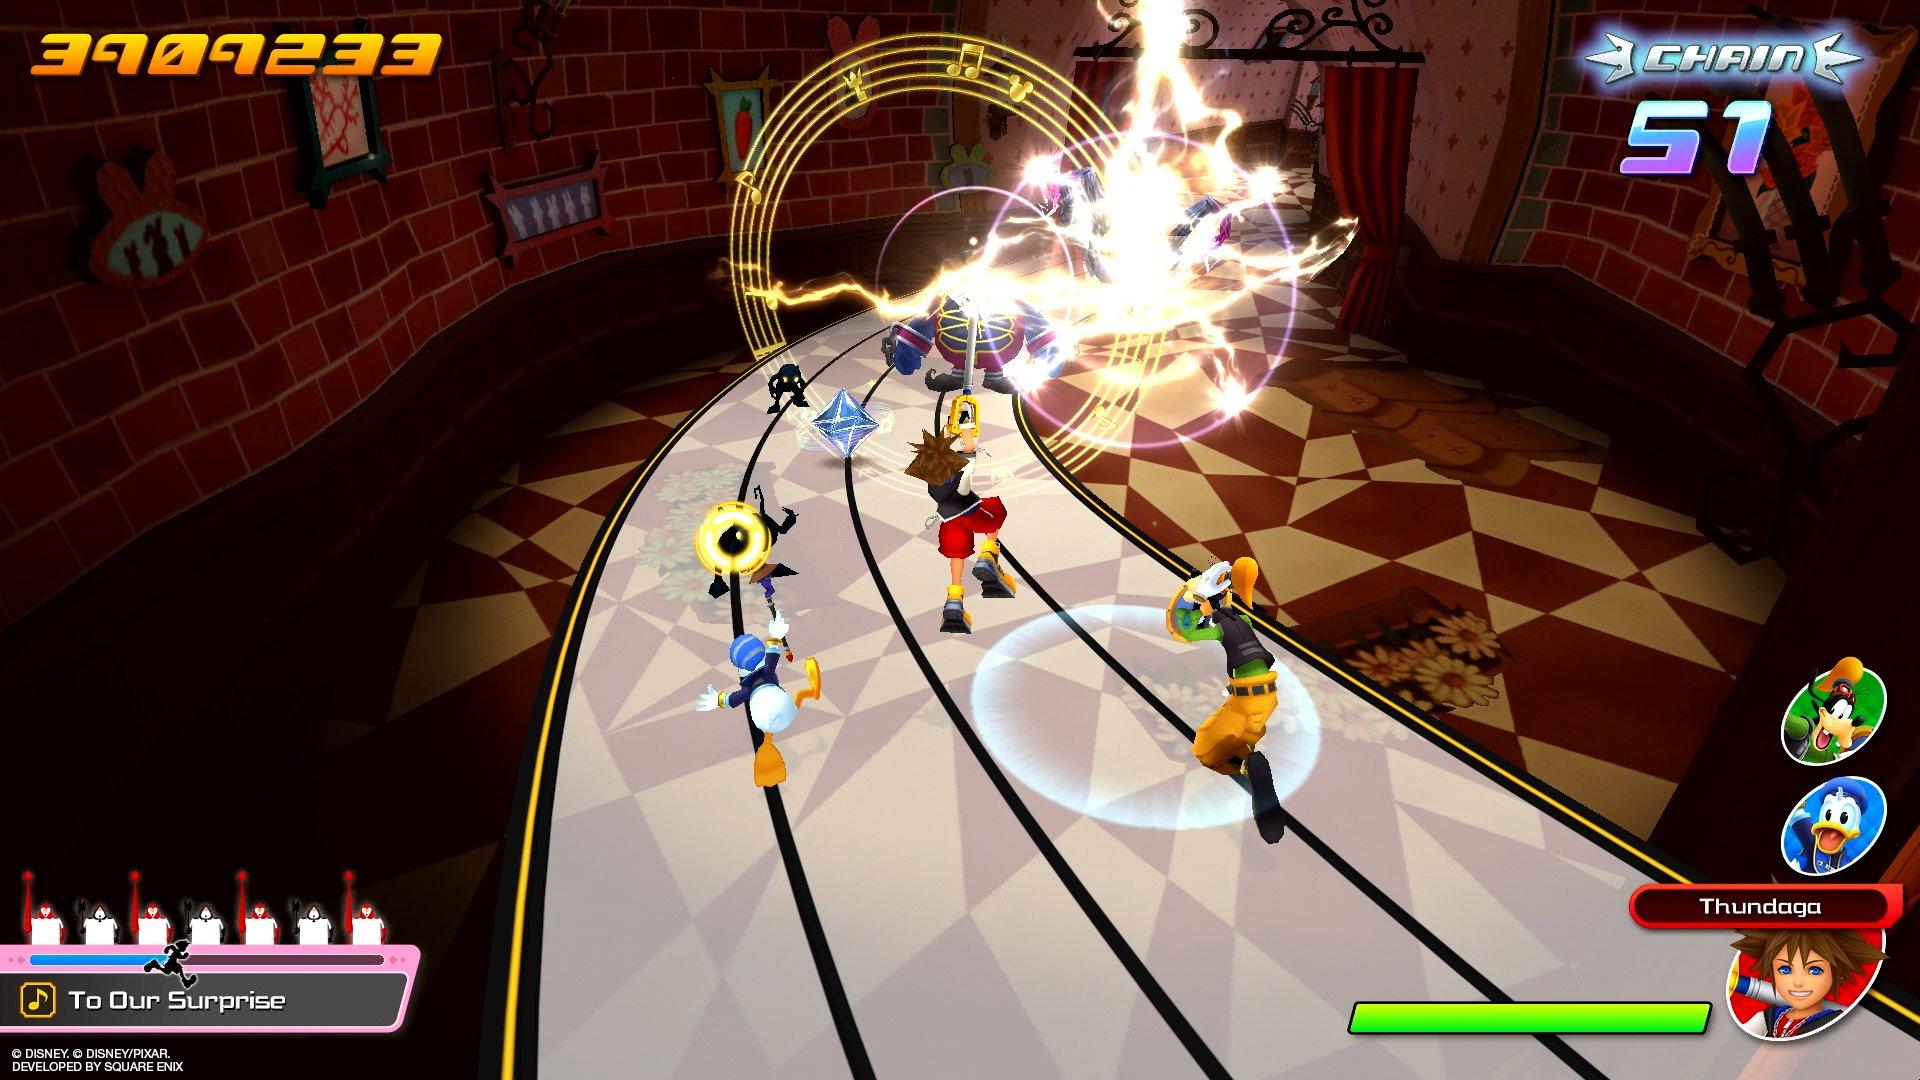 Kingdom Hearts: Melody of Memory Is a Rhythm Game Coming to Switch